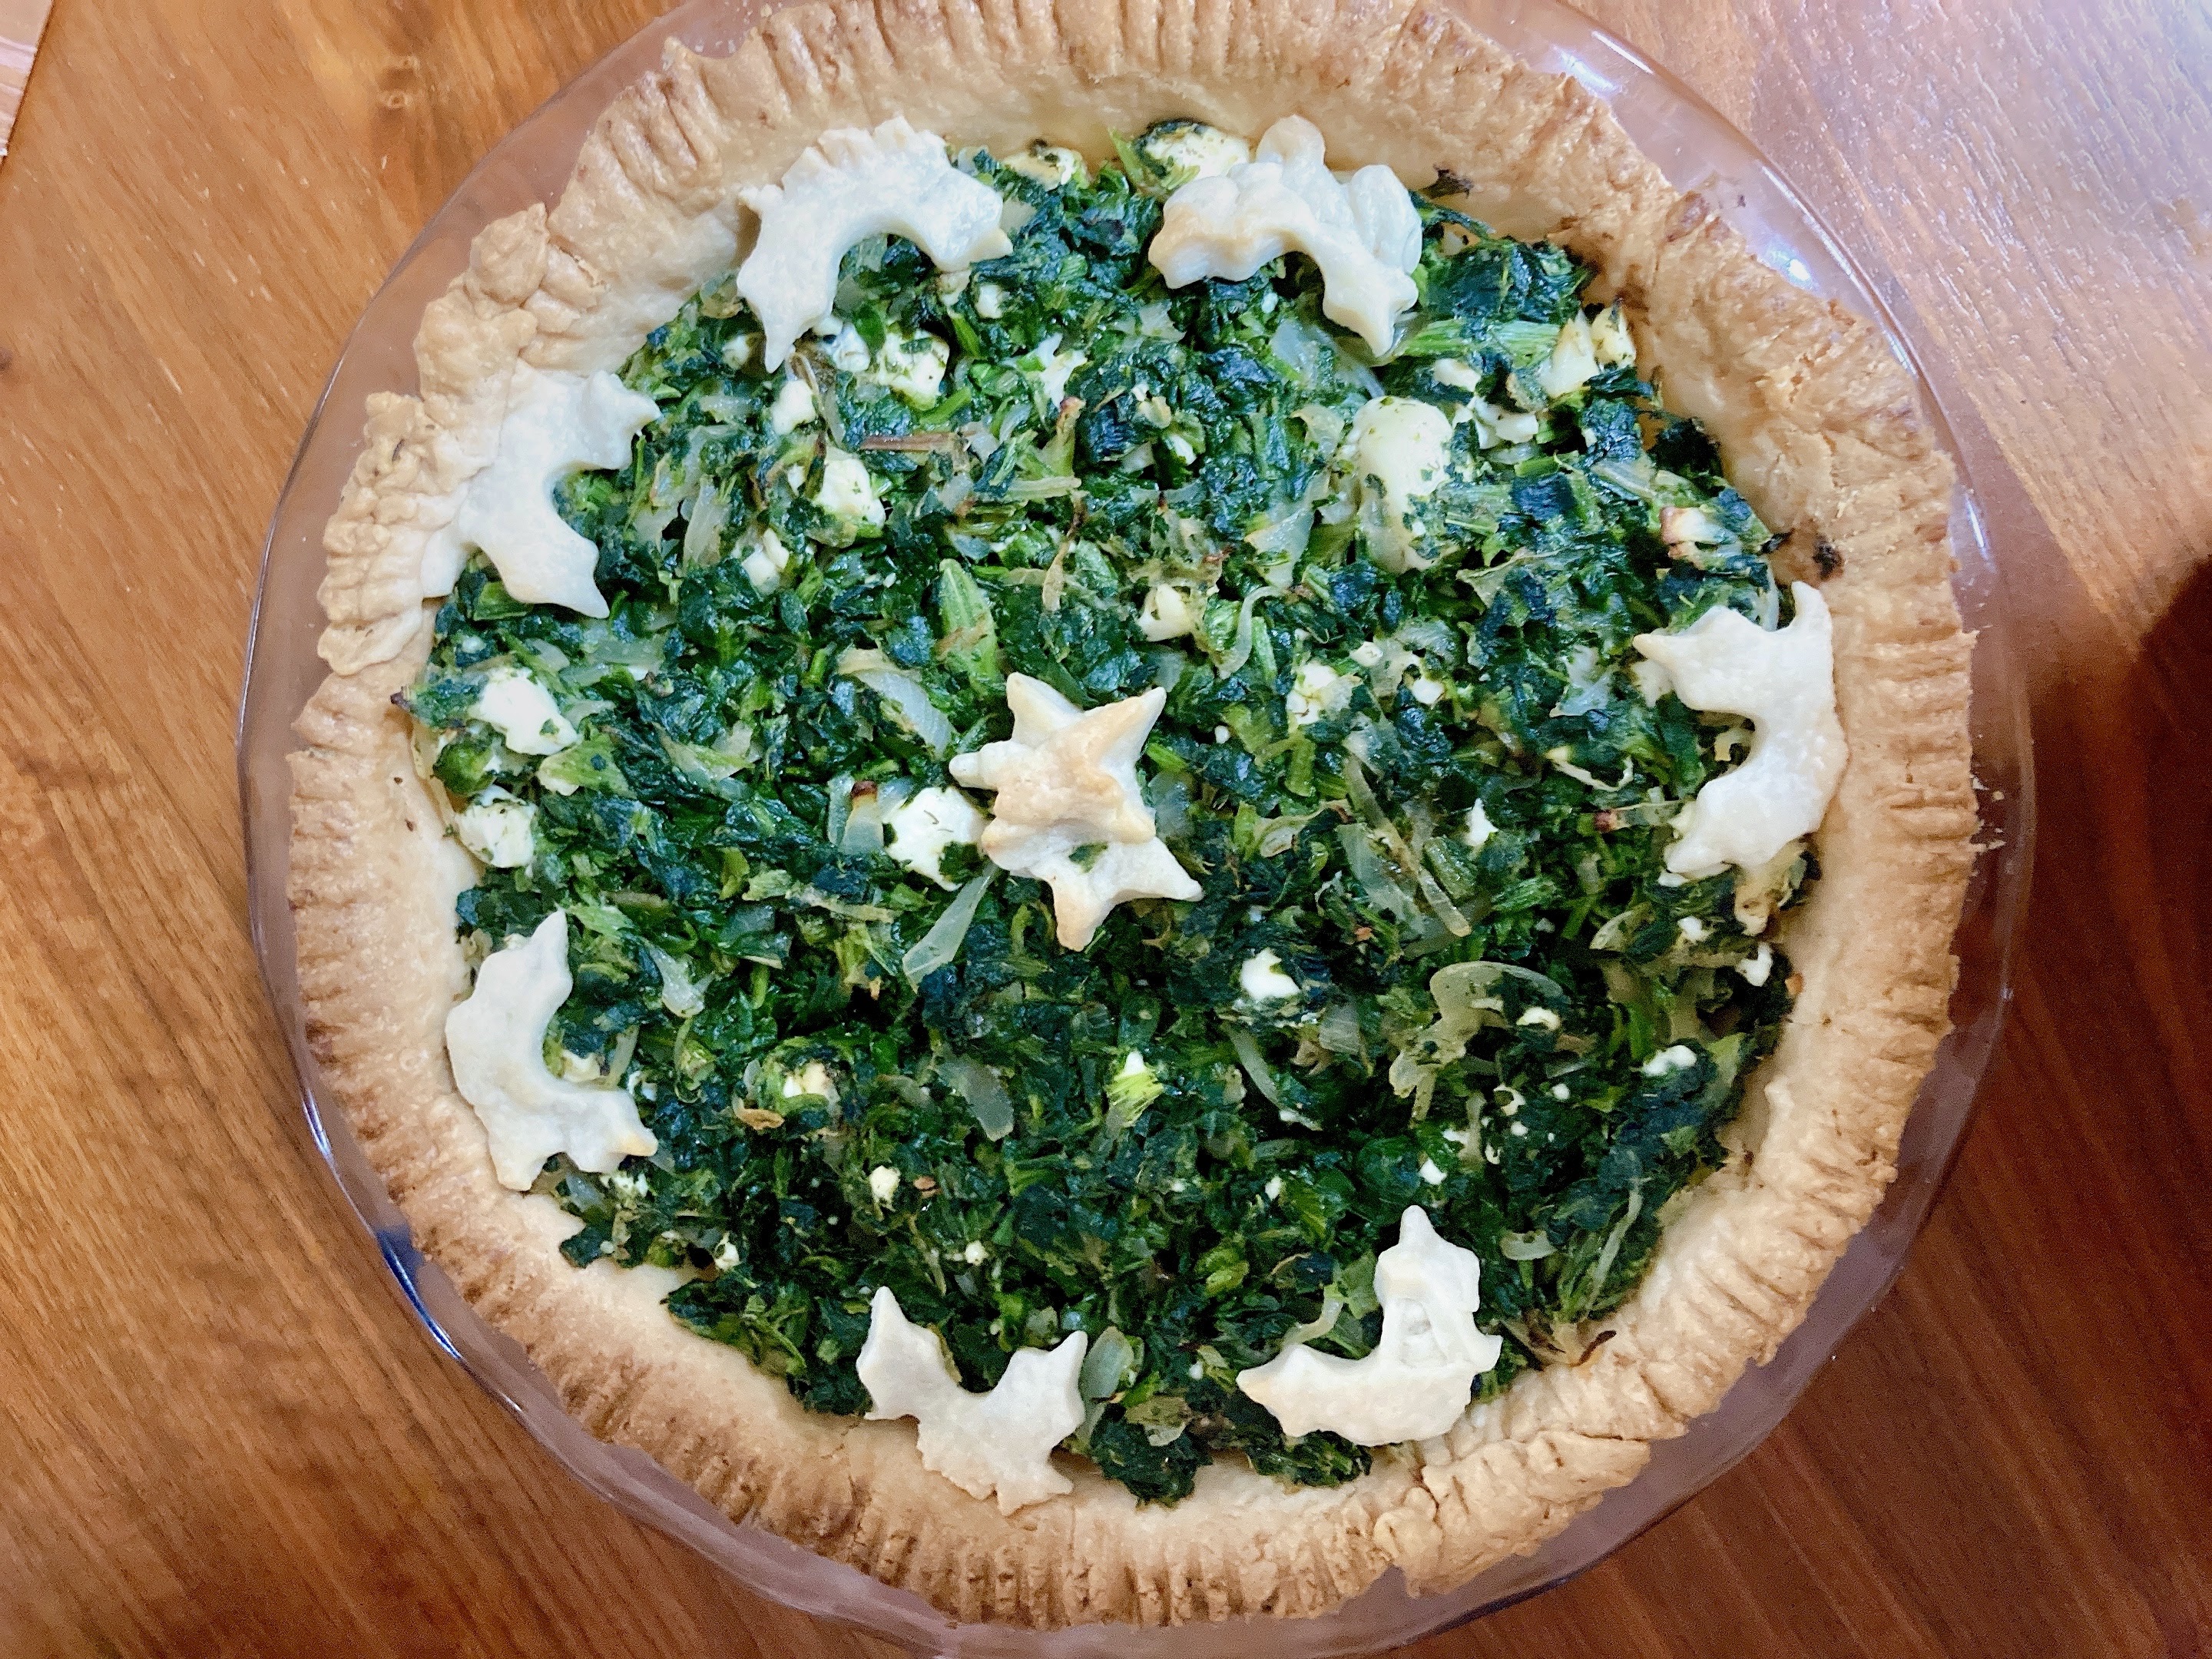 An open topped pie with bright green spinach filling and decorated with pie crust cut into the shapes of leaves.